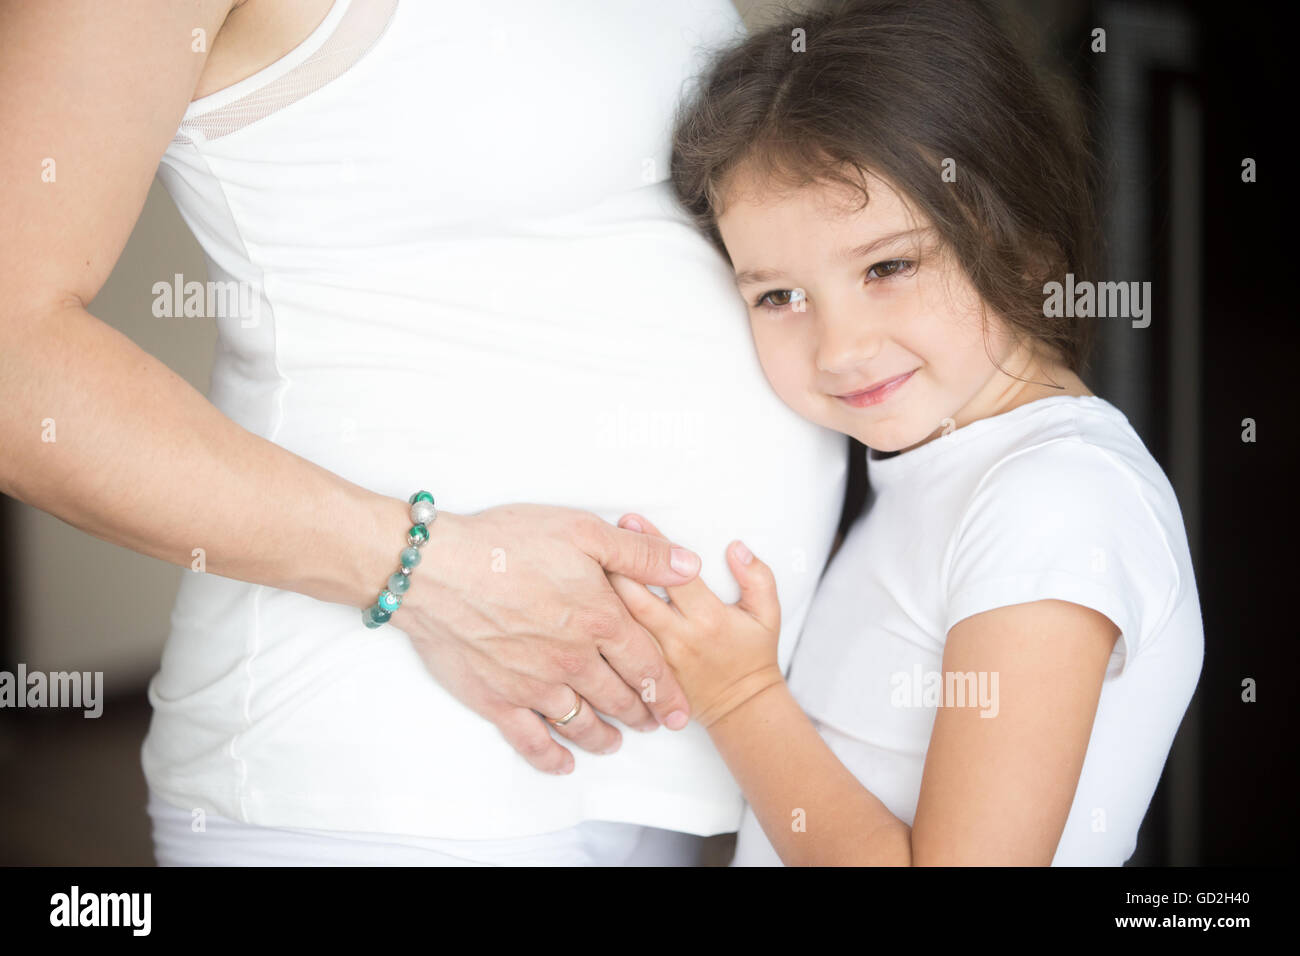 Family lifestyle concept. Adorable little girl hugging her expectant mother belly and listening to baby movements. Young happy Stock Photo